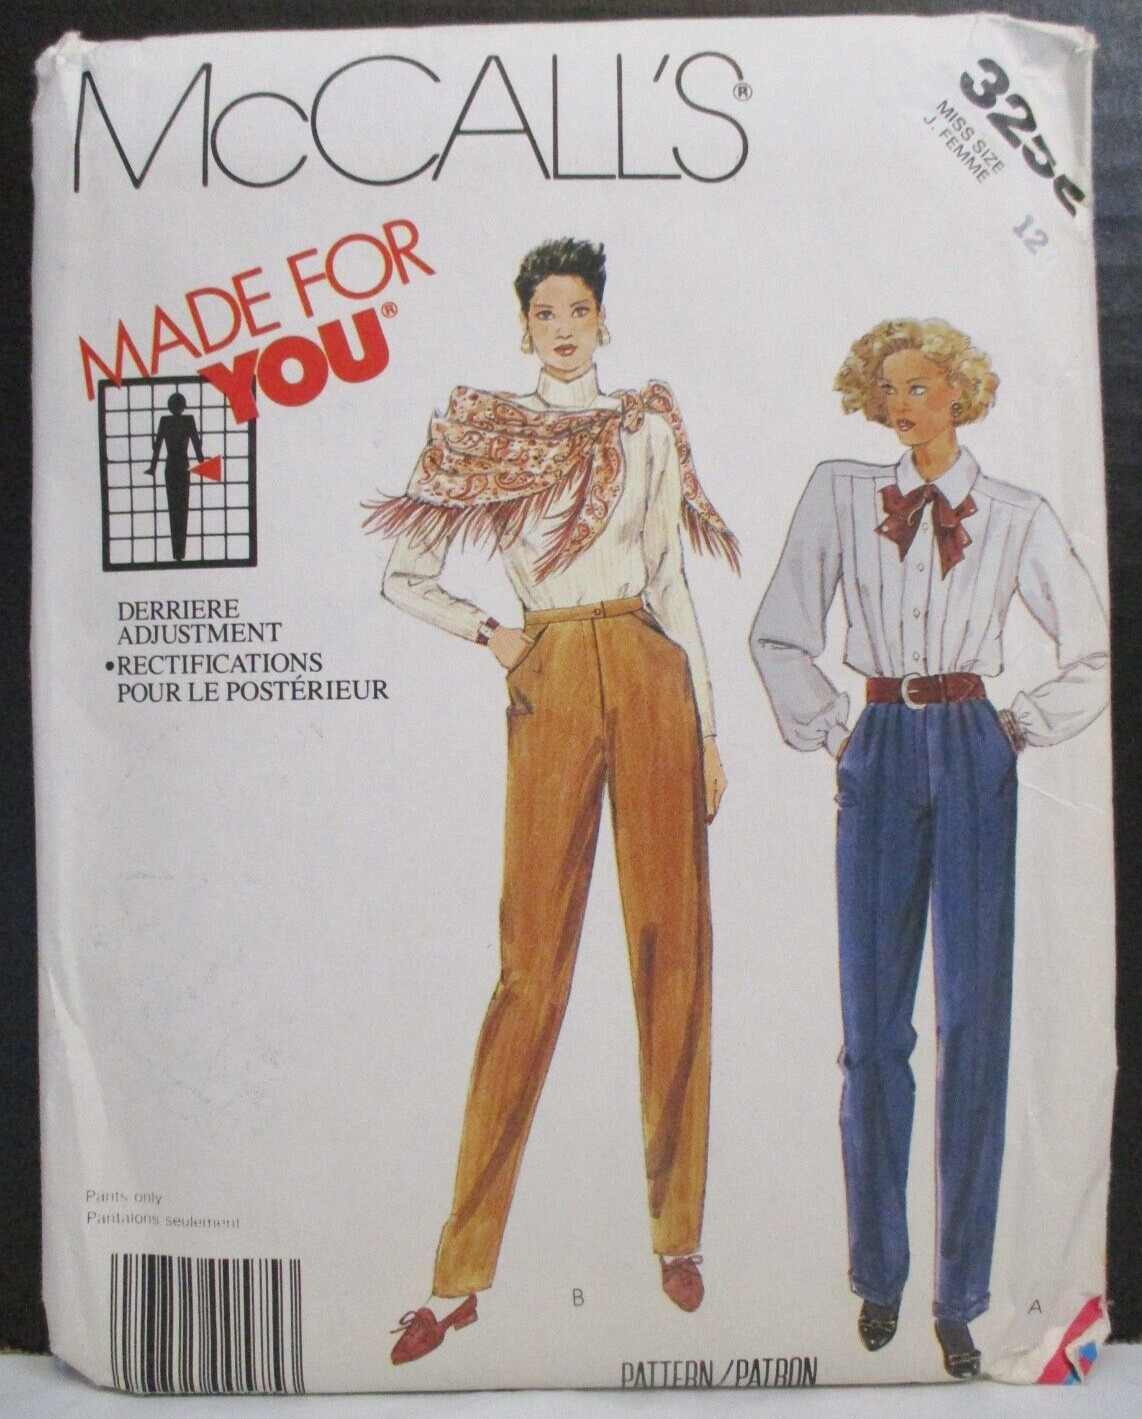 McCall\'s Pattern 3255 Misses Pants Size 12 Made for You Derriere Adjustment New